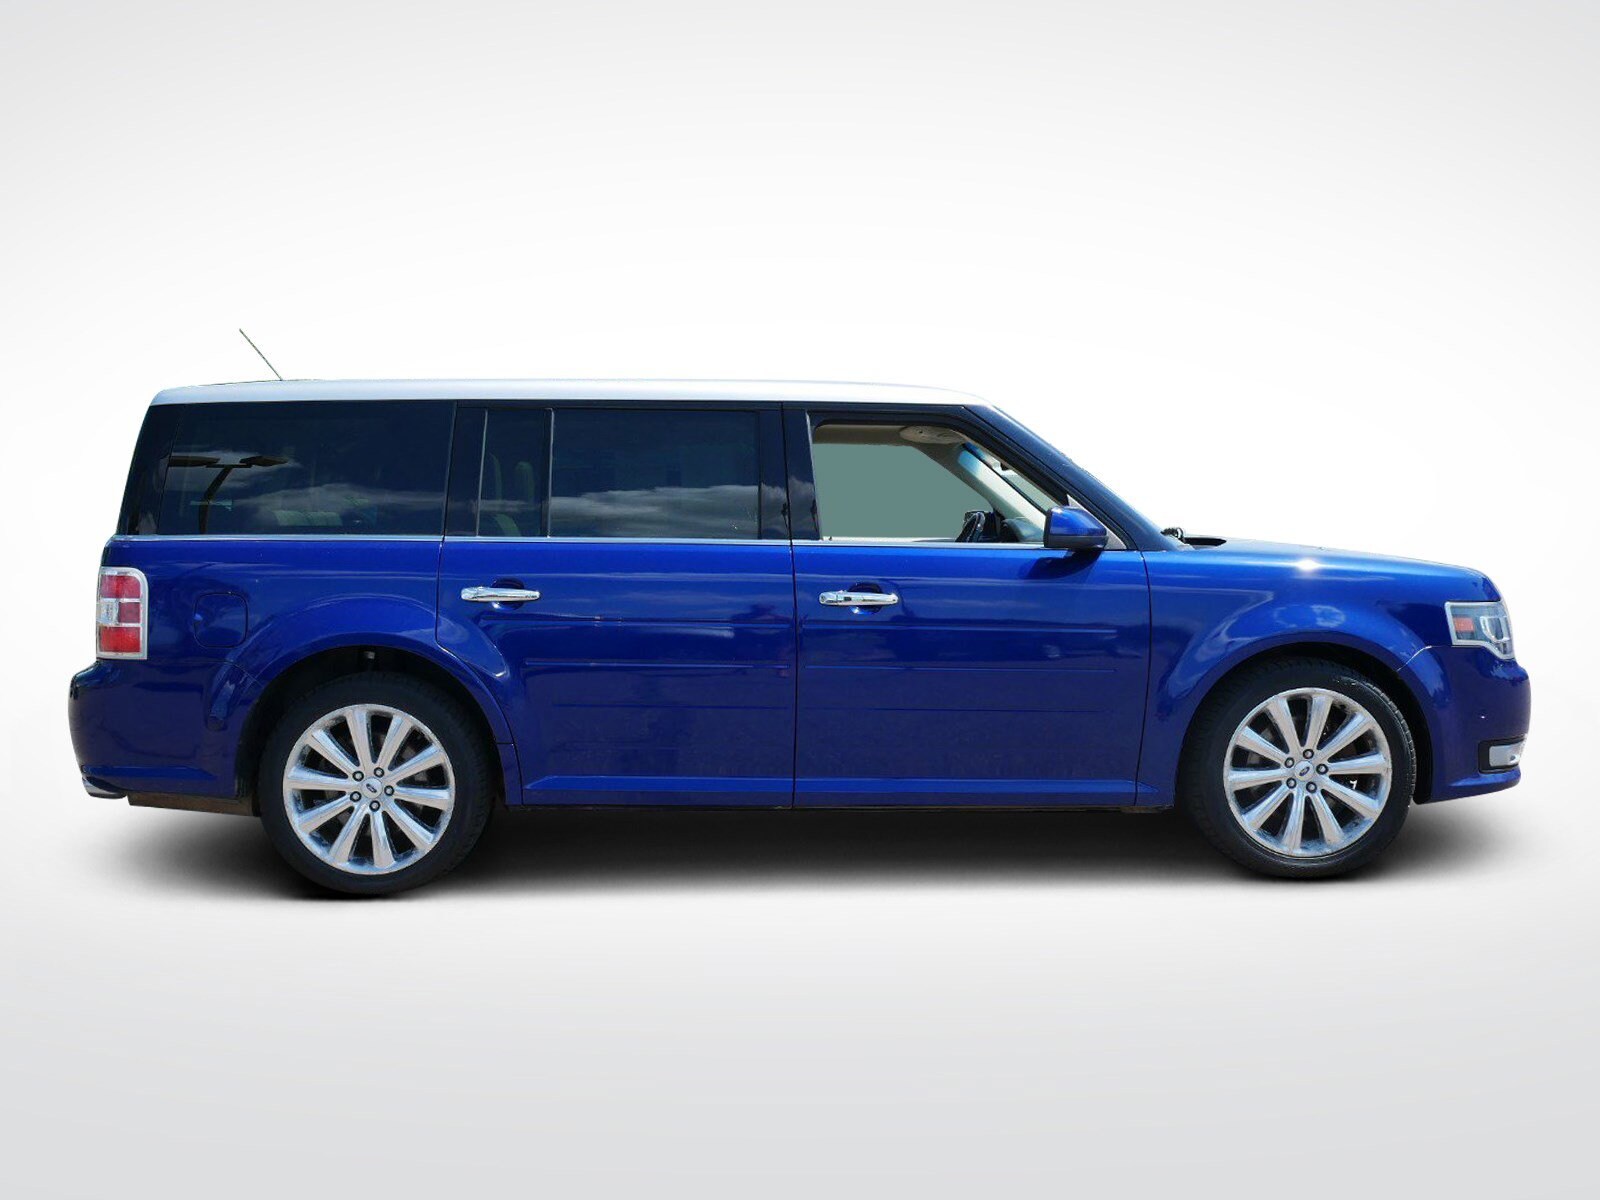 Used 2014 Ford Flex Limited with VIN 2FMHK6DT5EBD01143 for sale in Baxter, Minnesota